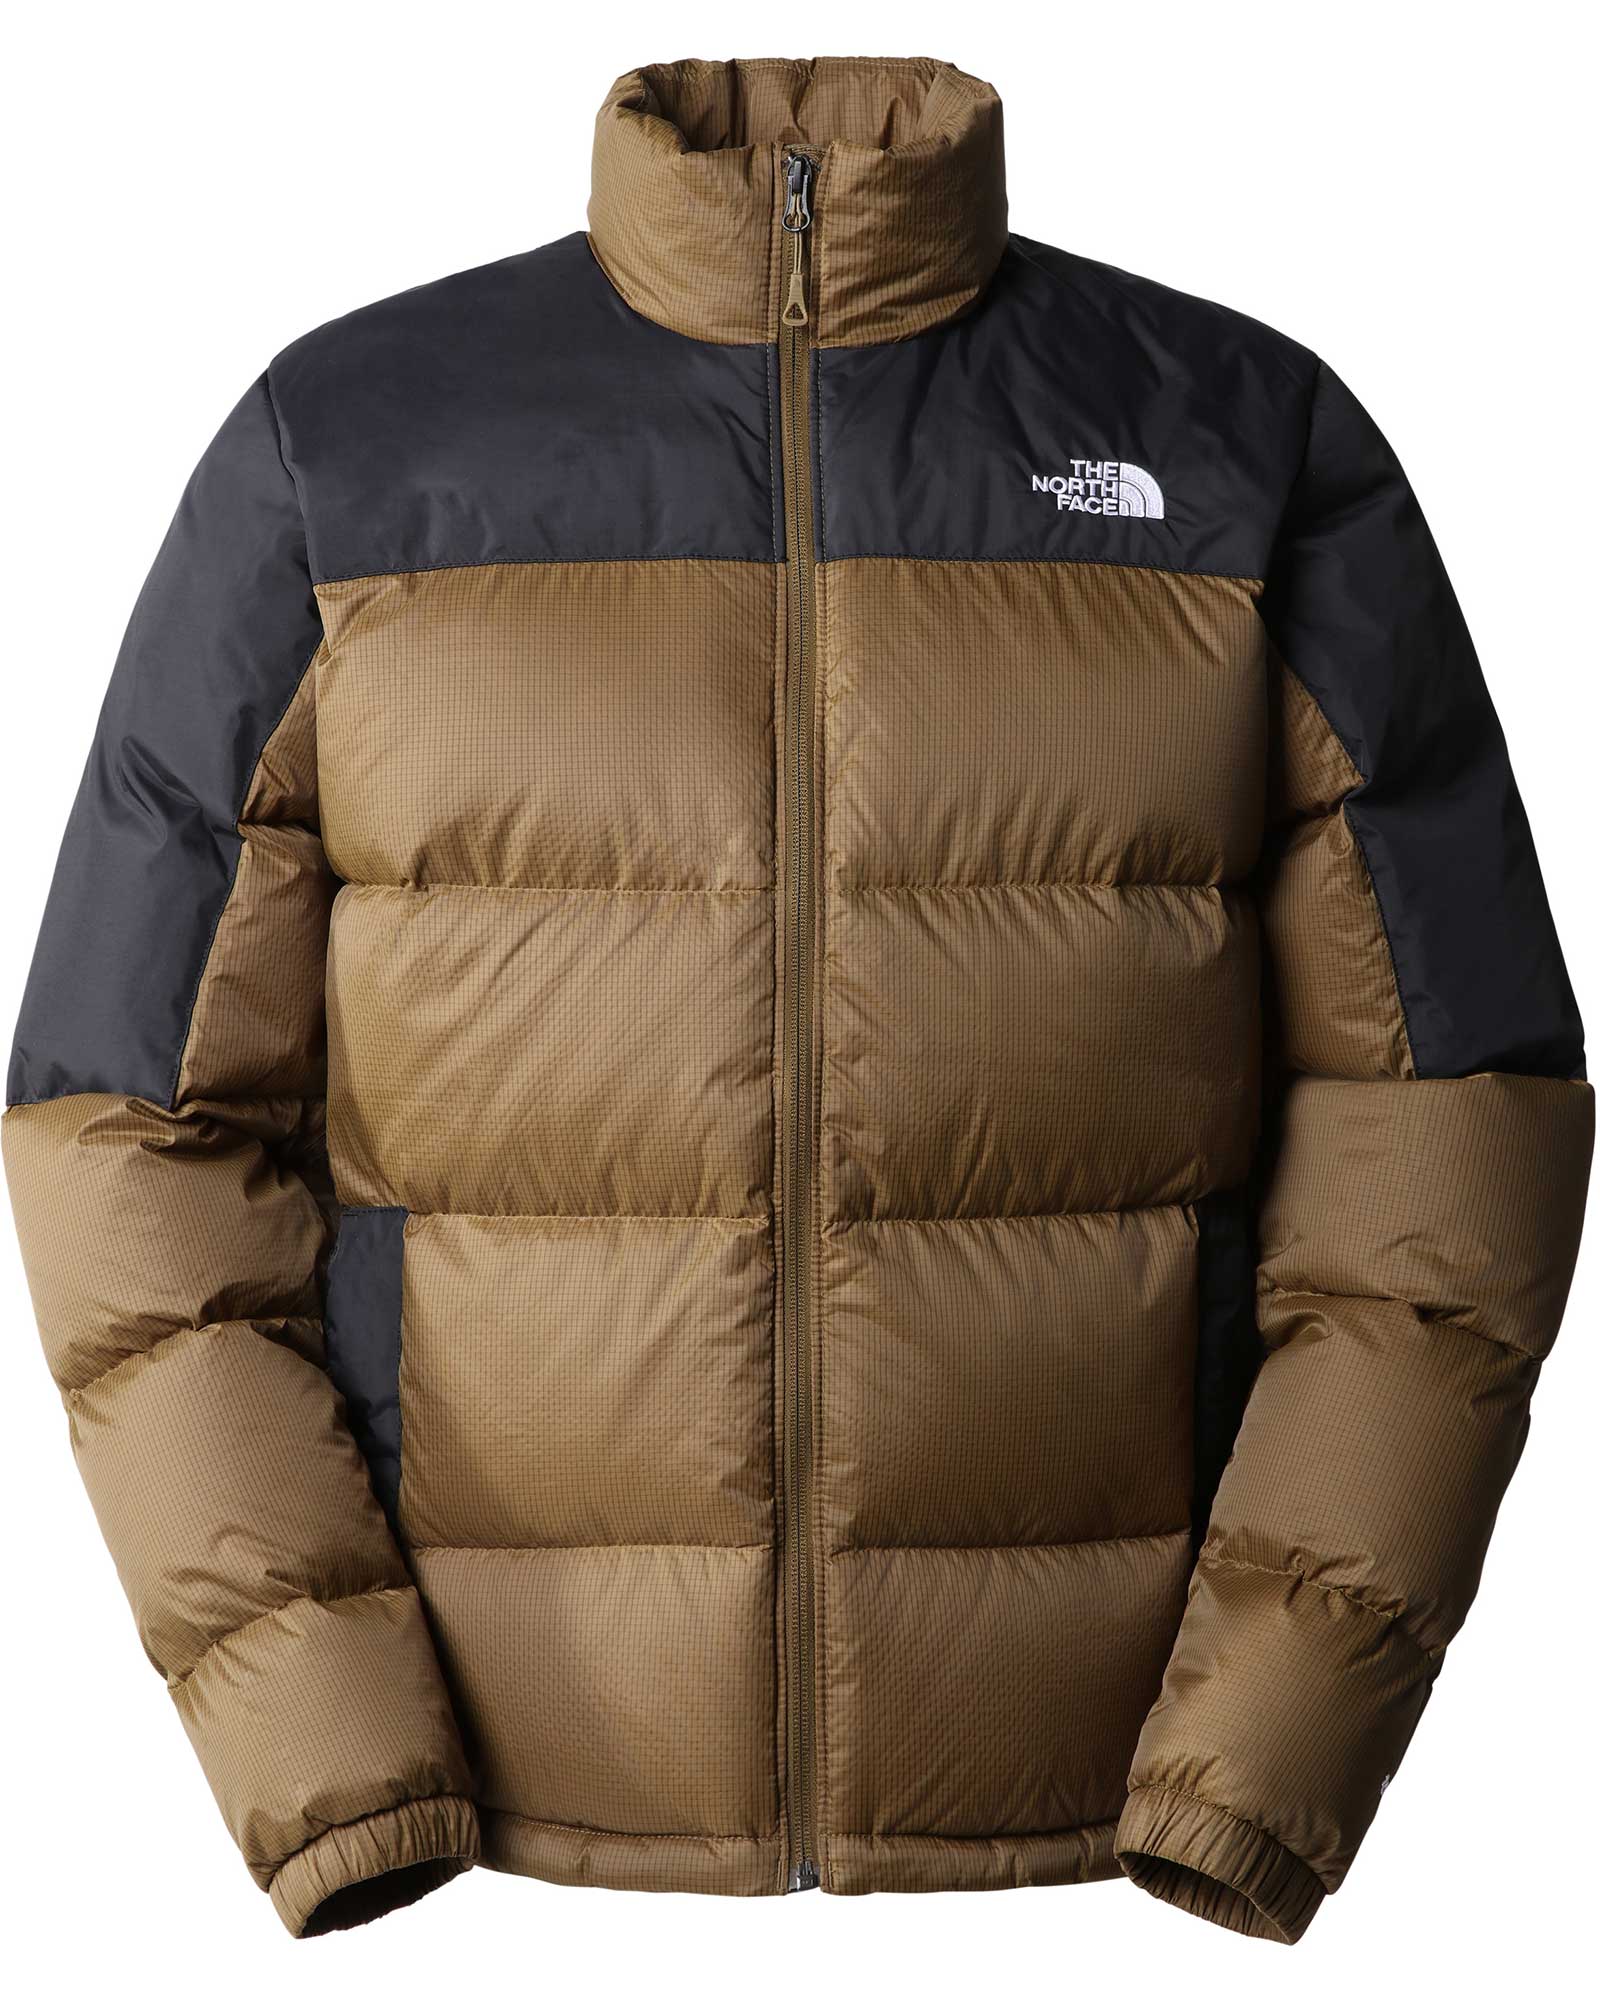 Product image of The North Face Diablo Men's Down Jacket